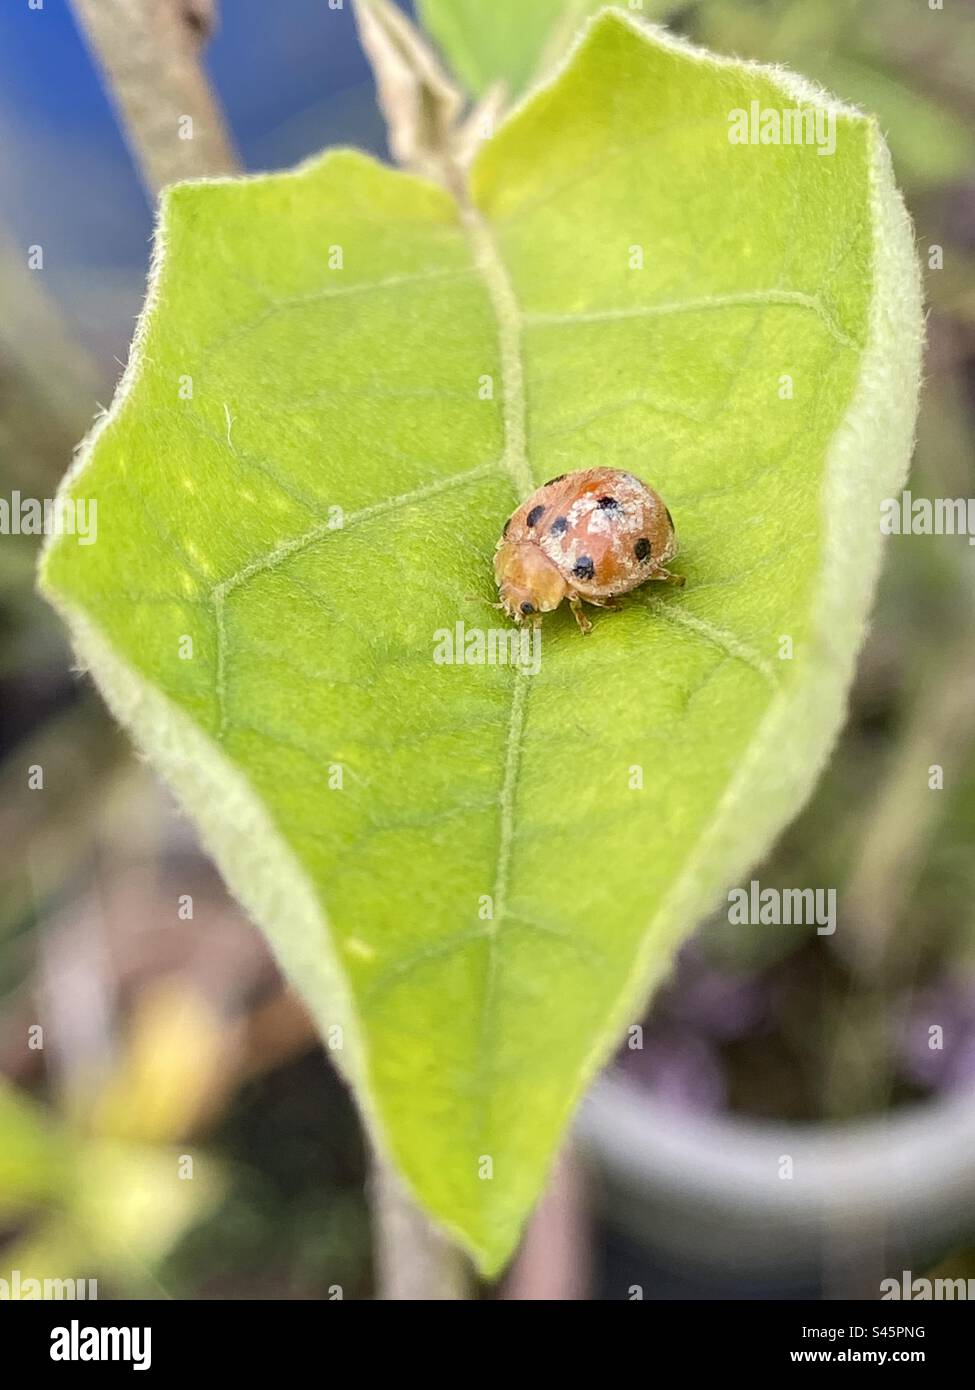 Outdoors photography of the little ladybug’s on the green leaf. Stock Photo